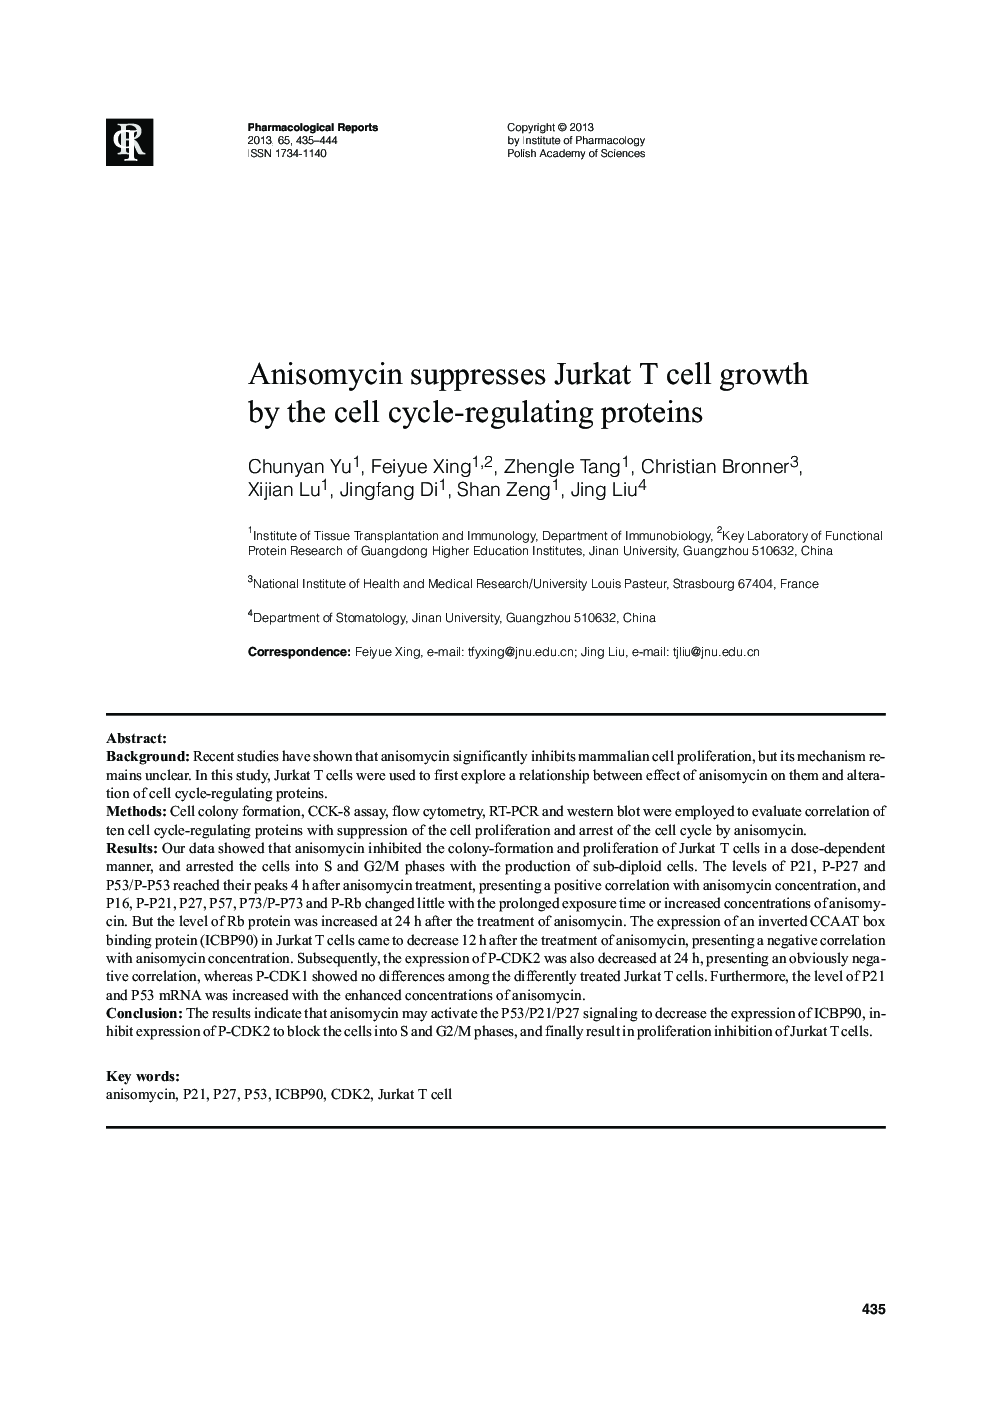 Anisomycin suppresses Jurkat T cell growth by the cell cycle-regulating proteins